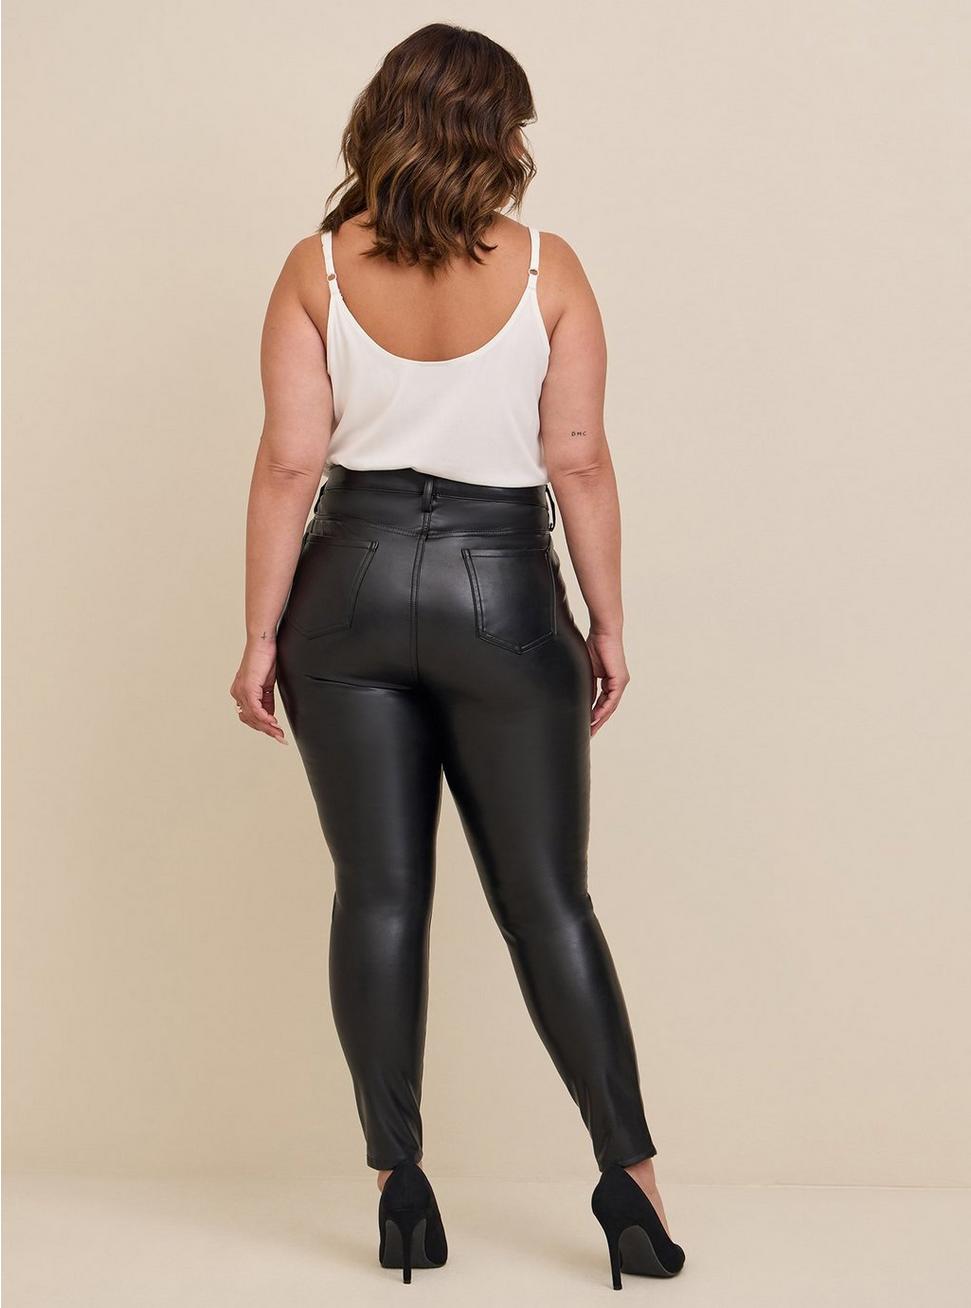 Plus Size - Sky High Skinny Faux Leather High-Rise Pant - Torrid